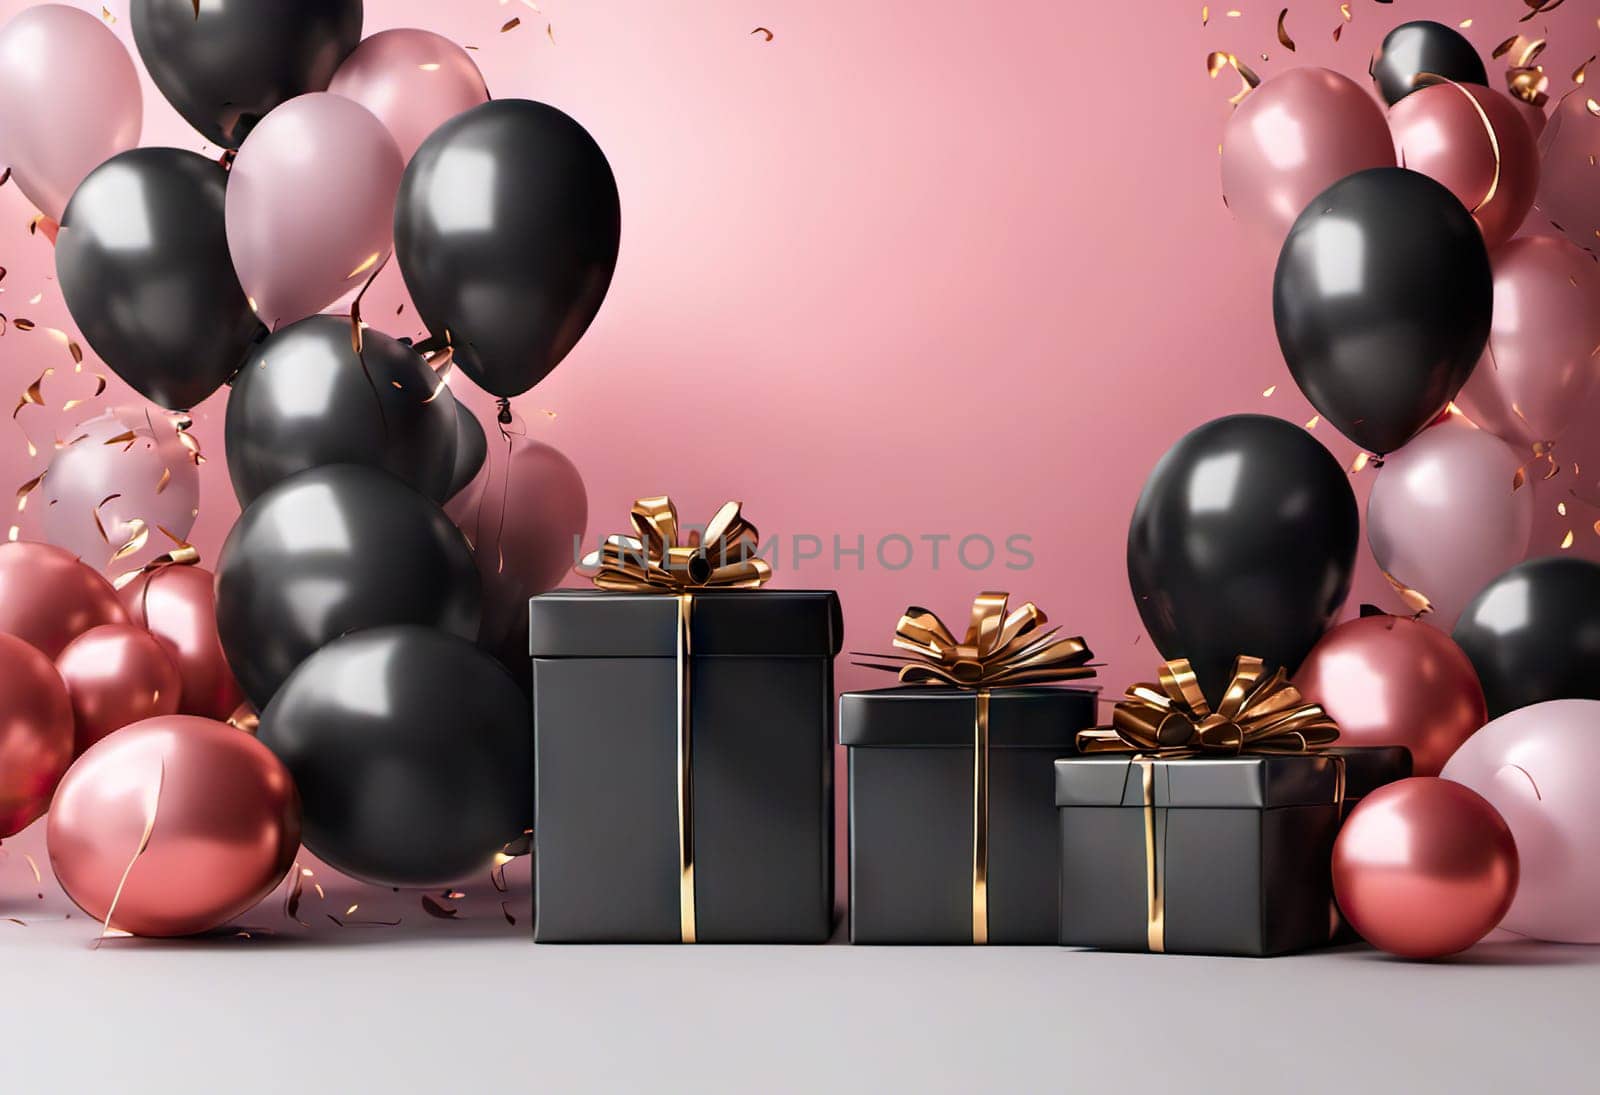 Gift box with colorful balloons and confetti on background, copy space, holiday concept for birthday or black friday discounts by EkaterinaPereslavtseva